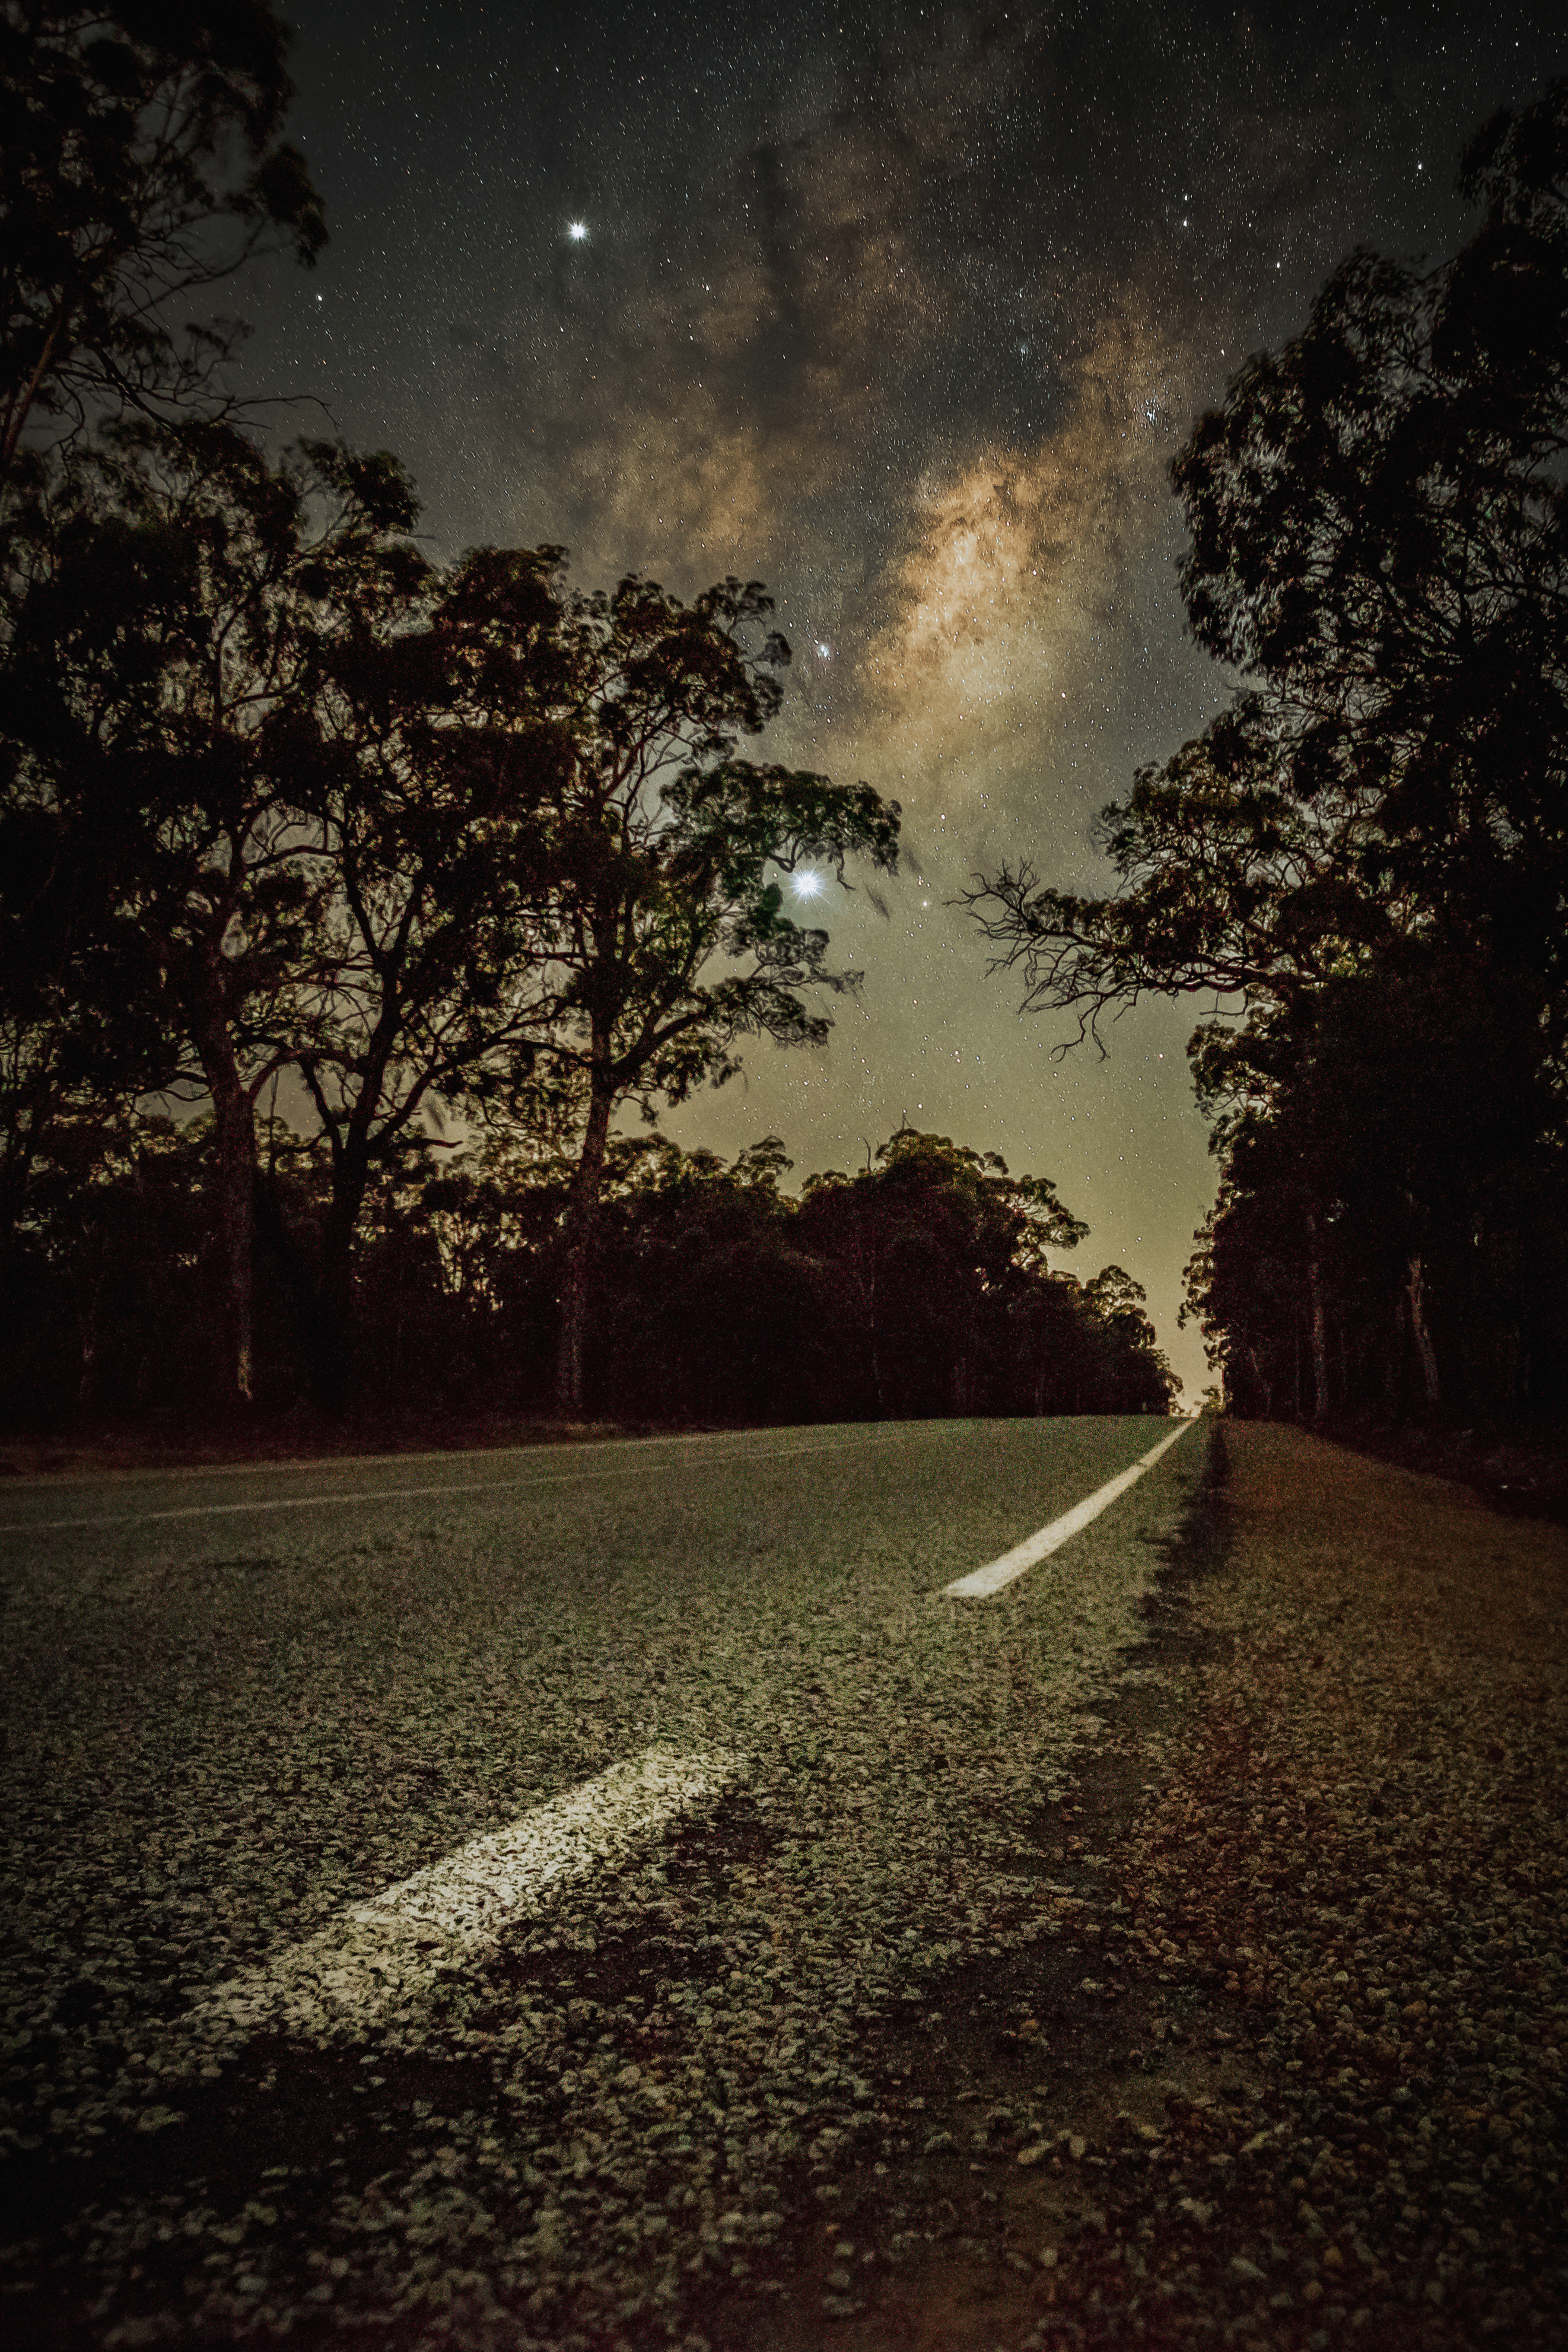 Our Milky Way - #10 Highway